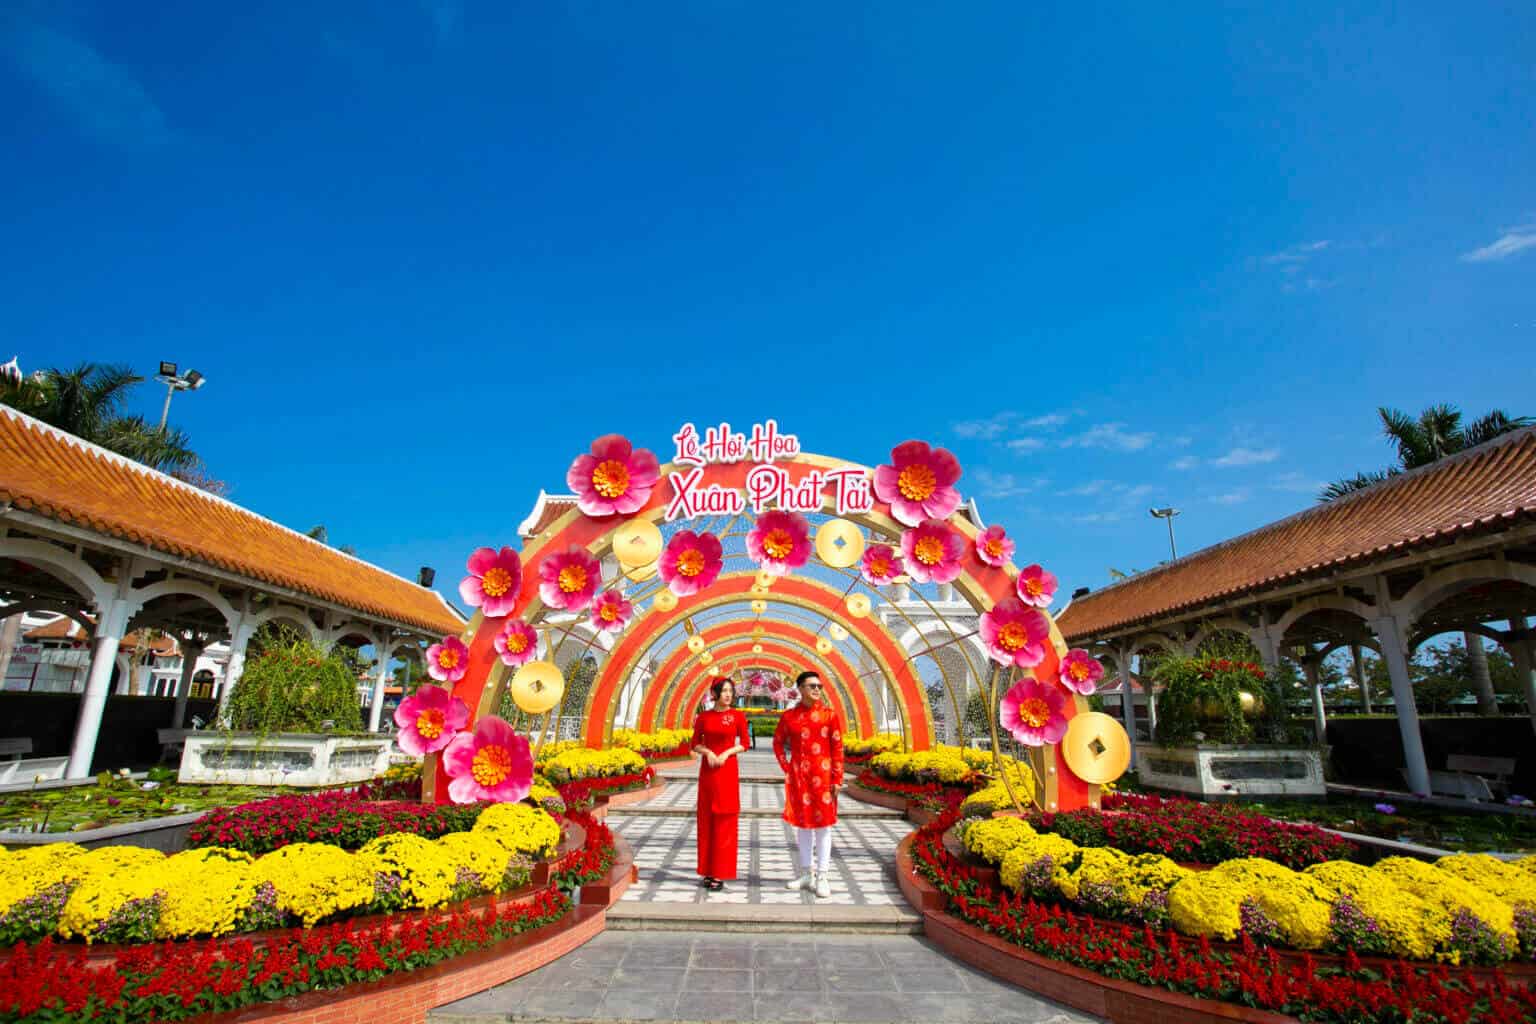 THIS LUNAR NEW YEAR, COMING TO SUN WORLD DANANG WONDERS, YOU WILL BE  EXTREMELY HAPPY WITH THE SPRING FLOWER FESTIVAL “XUAN PHAT TAI” (FORTUNE  SPRING) - Asia Park - Công viên Châu Á